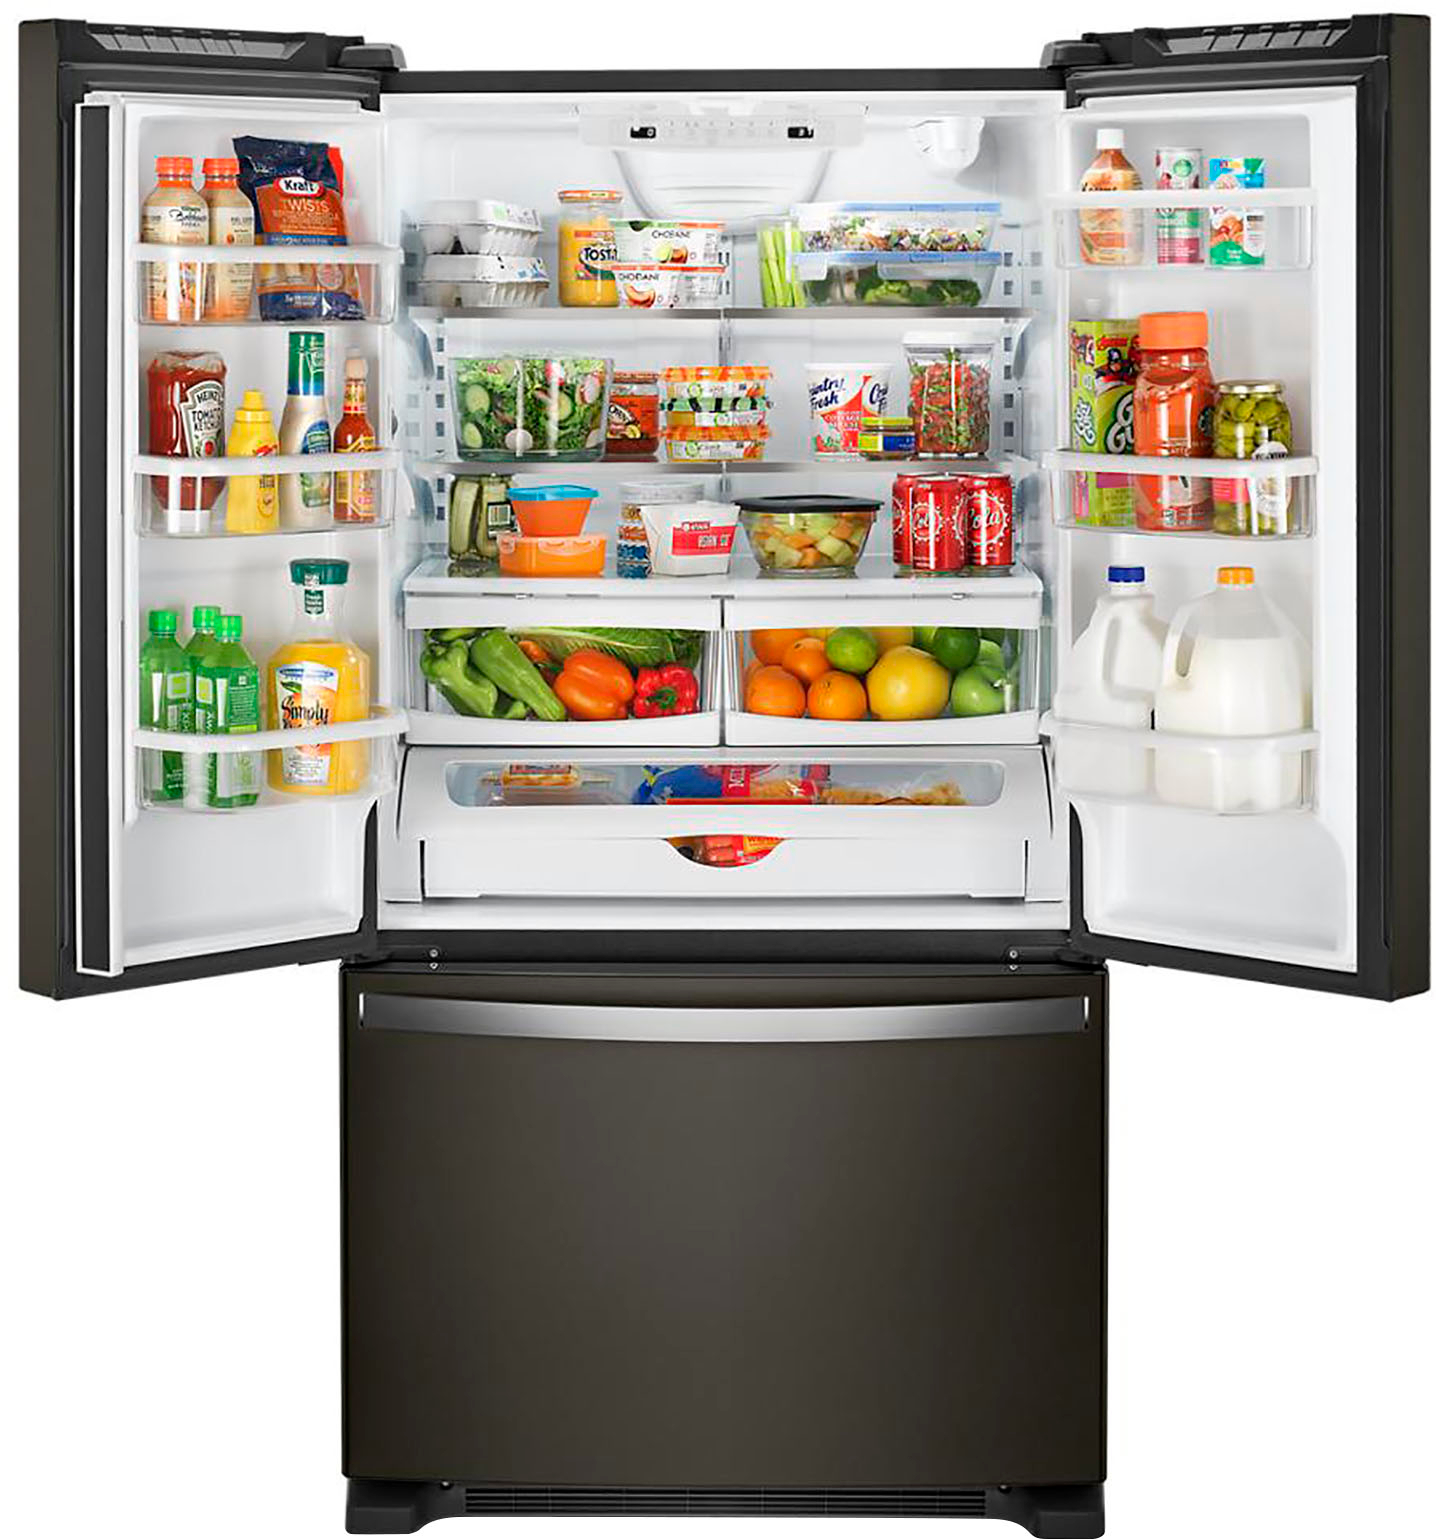 Angle View: Whirlpool - 25.2 Cu. Ft. French Door Refrigerator with Internal Water Dispenser - Black